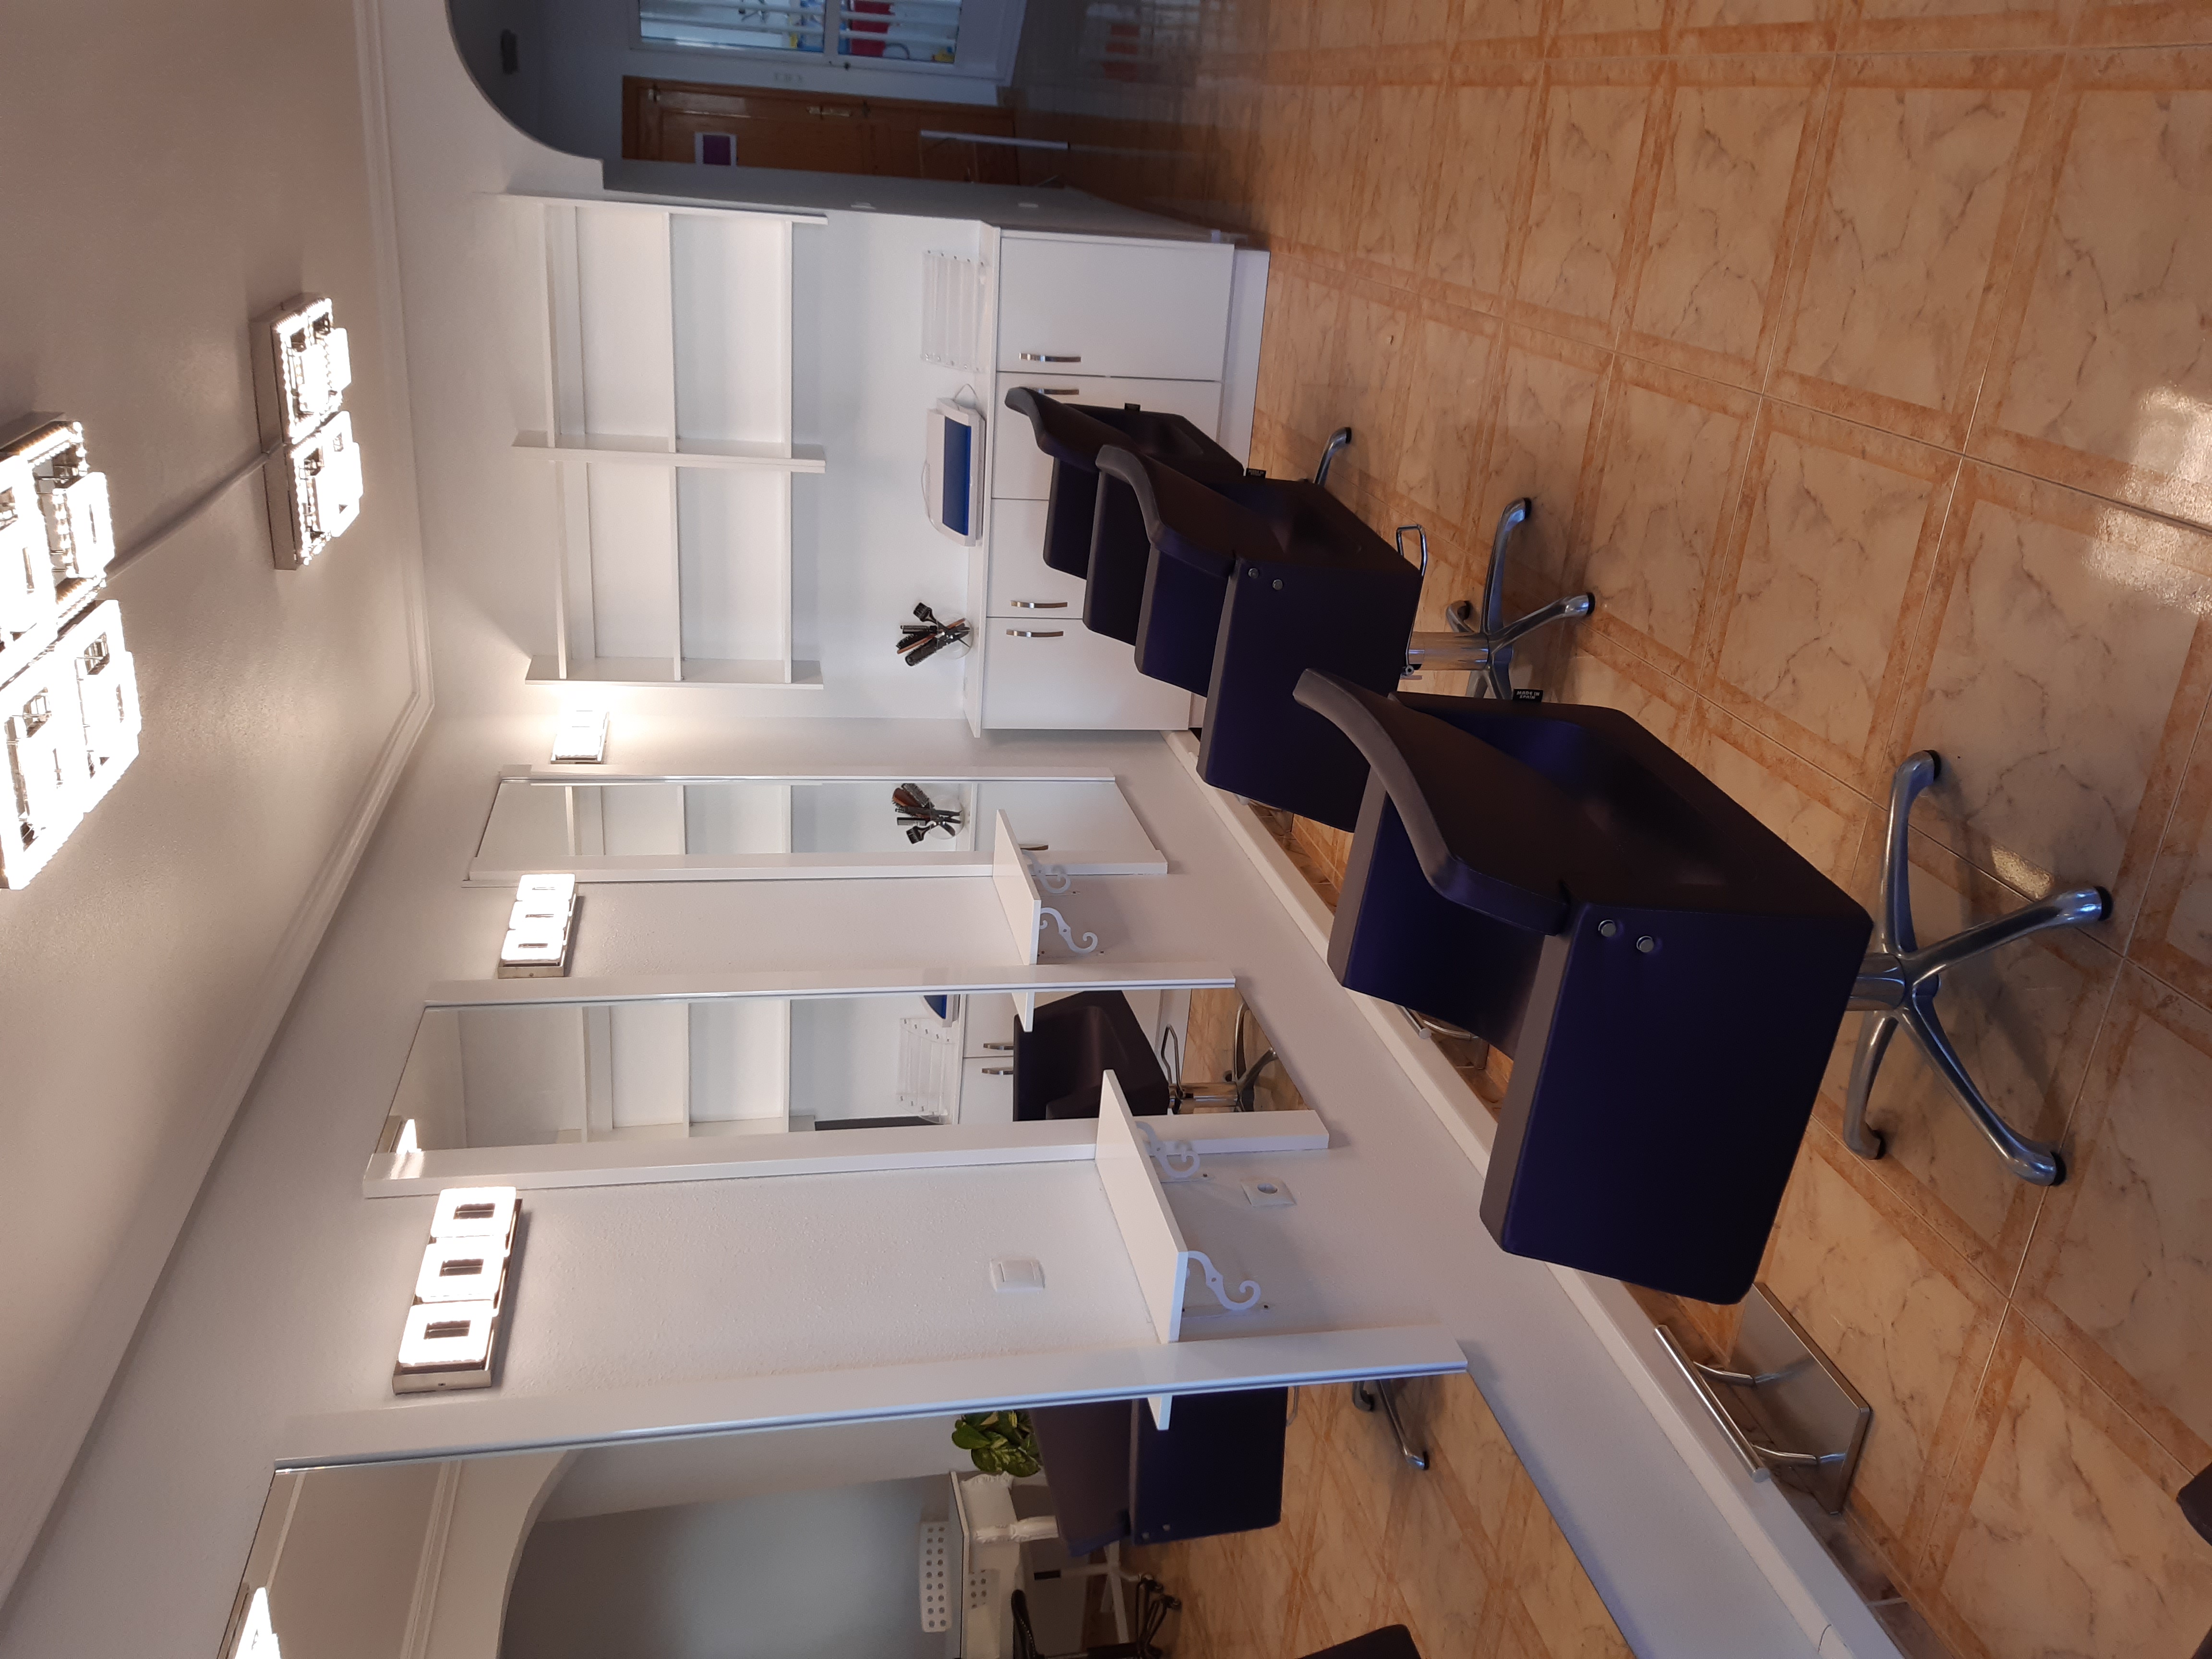 Claws Unisex Hair & Nail Salon for Rent & Sale in La Zenia: address,  telephone number and opening hours and times - Beauticians, Tanning, Nails  and Beauty salons in La Zenia -